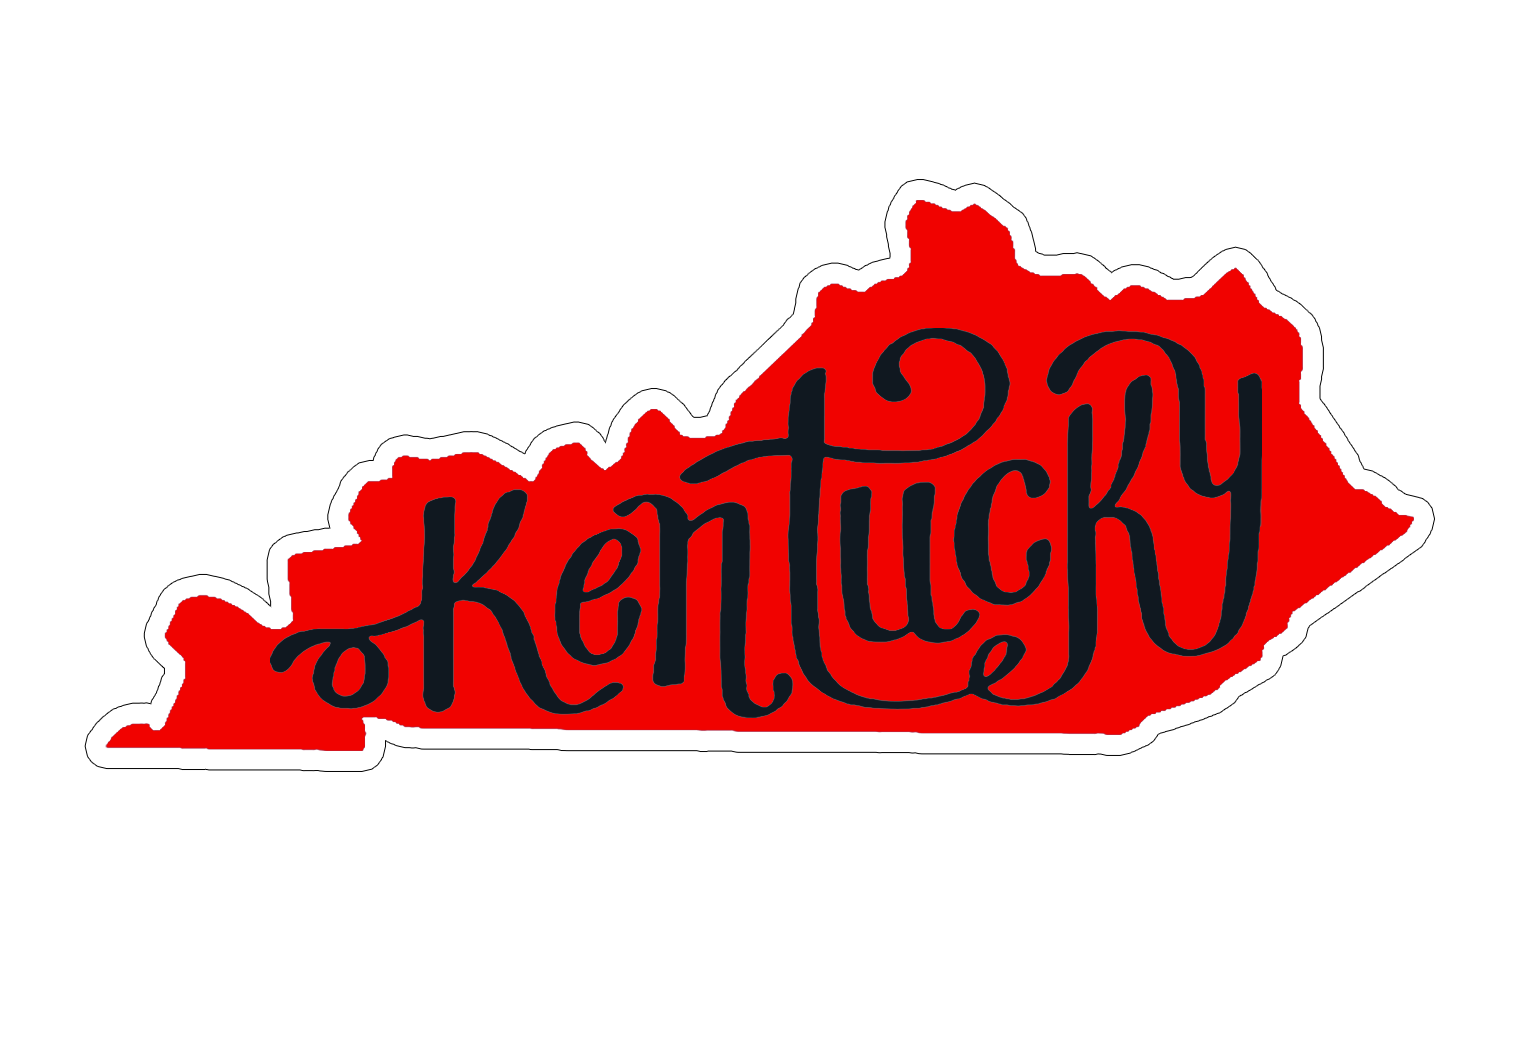 Kentucky Shape Red and Black Sticker